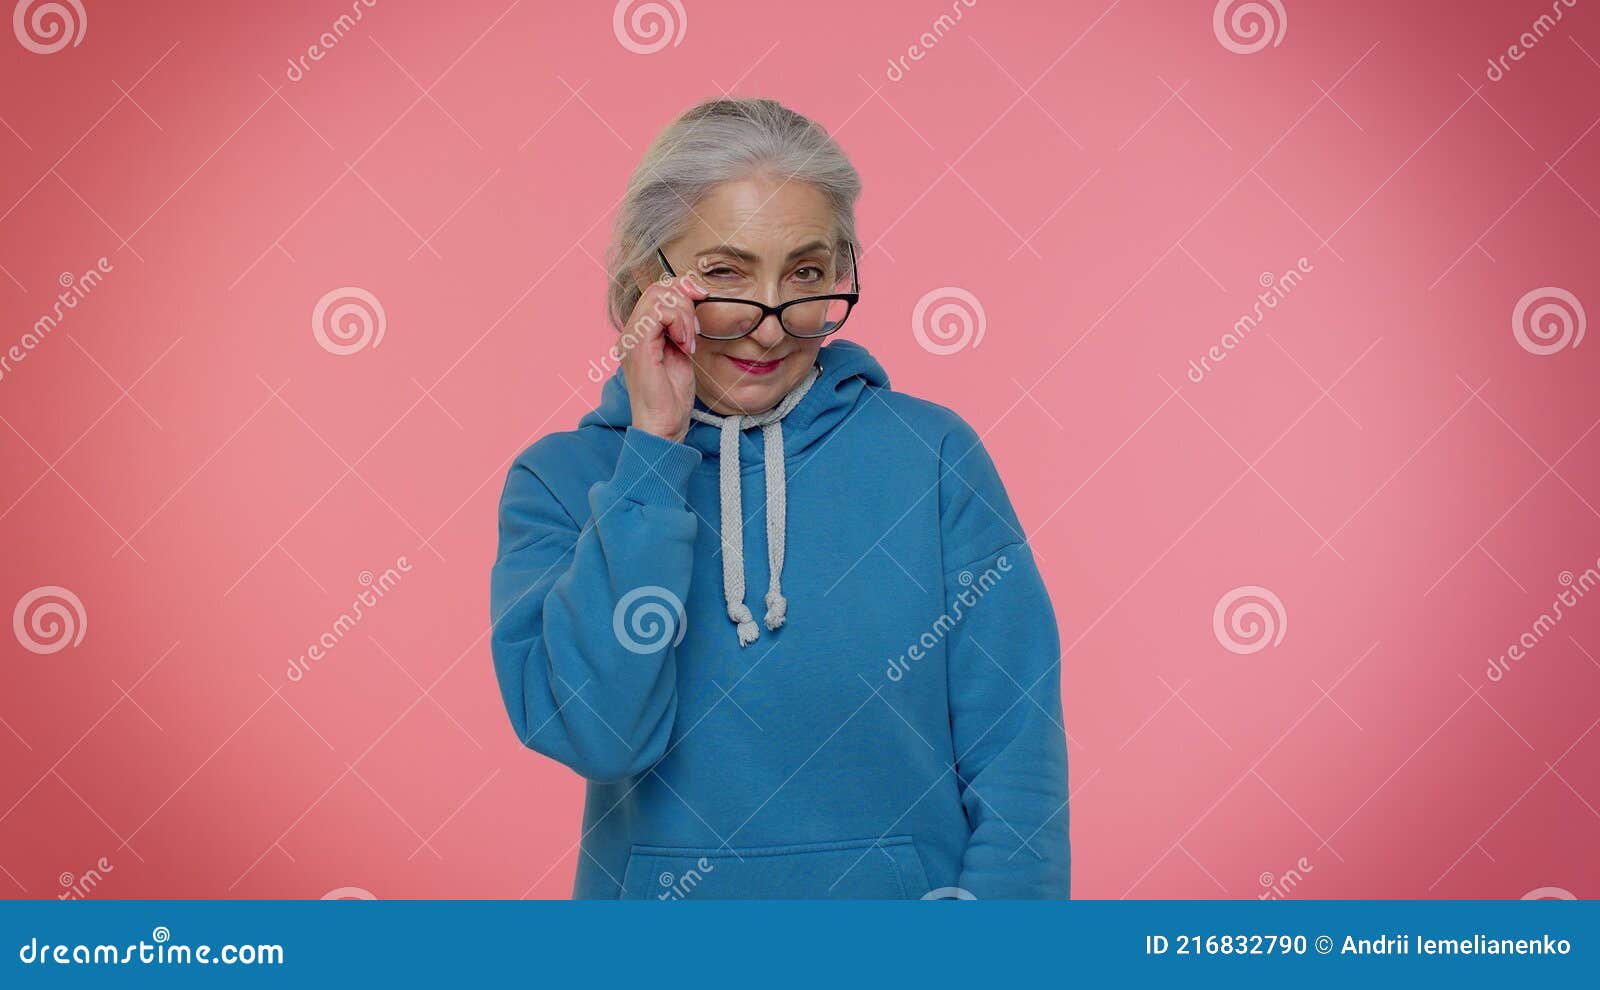 Happy Playful Elderly Granny Woman Blinking Eye Looking At Camera With Smile Expressing 